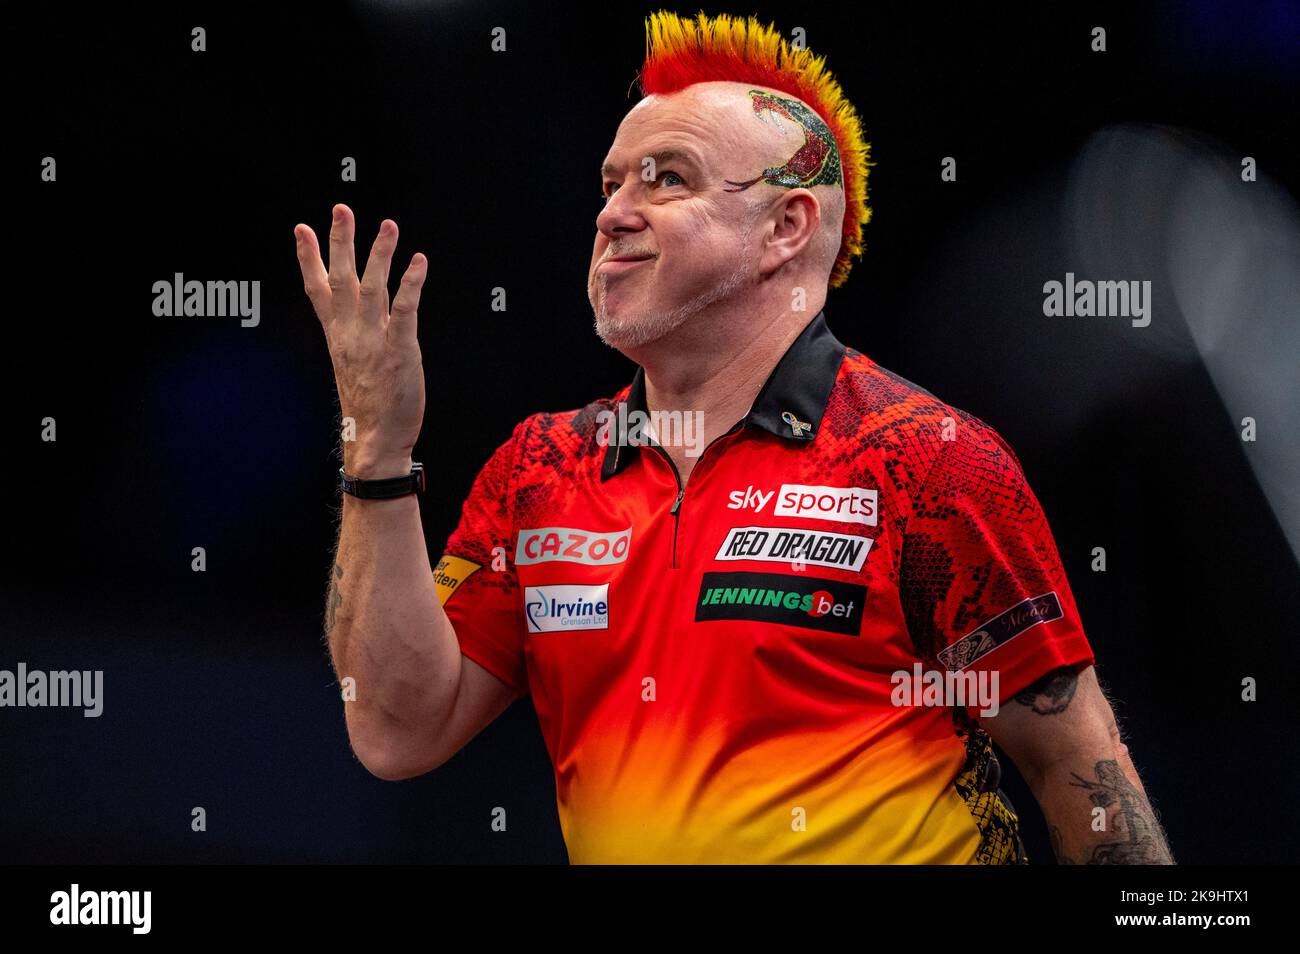 Dortmund, Germany. 28th Oct, 2022. Darts, European Darts Championship, European Darts Championship of the Professional Darts Corporation in the Westfalenhalle: Peter Wright cheers after the win over Ryan Meikle. Credit: David Inderlied/dpa/Alamy Live News Stock Photo